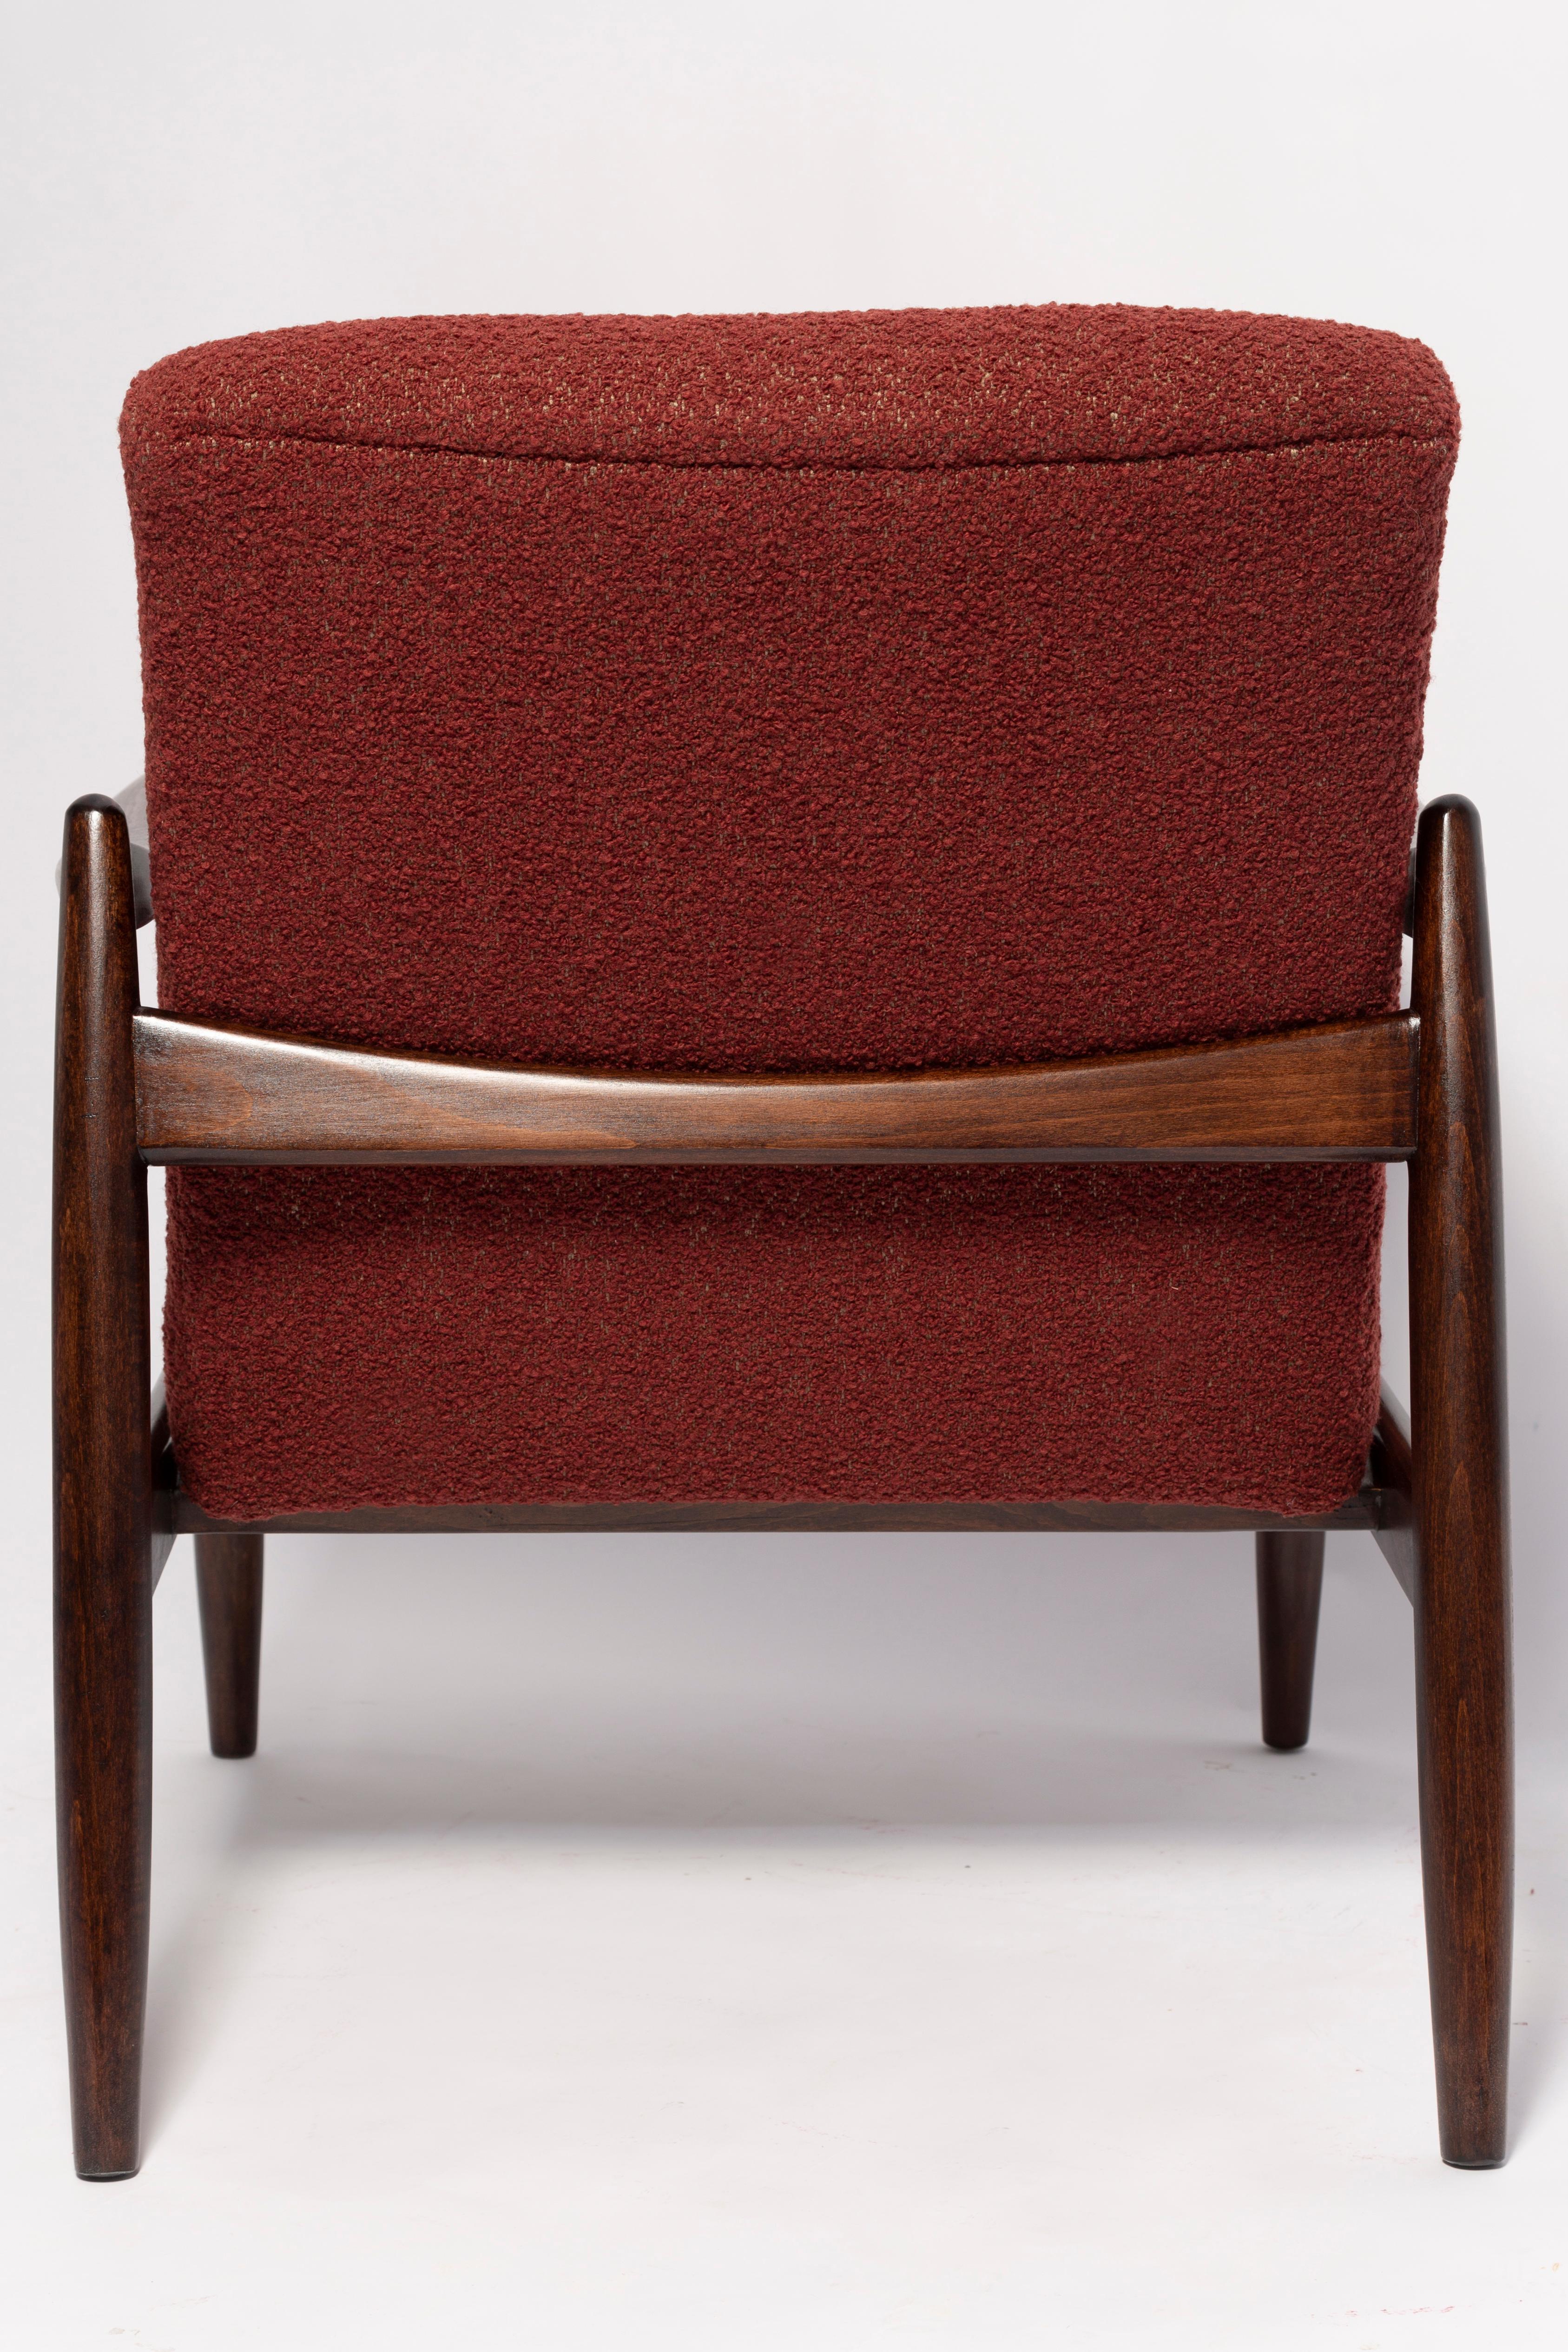 Two Mid Century Burgundy Boucle GFM-64 Armchairs, Edmund Homa, Europe, 1960s For Sale 4